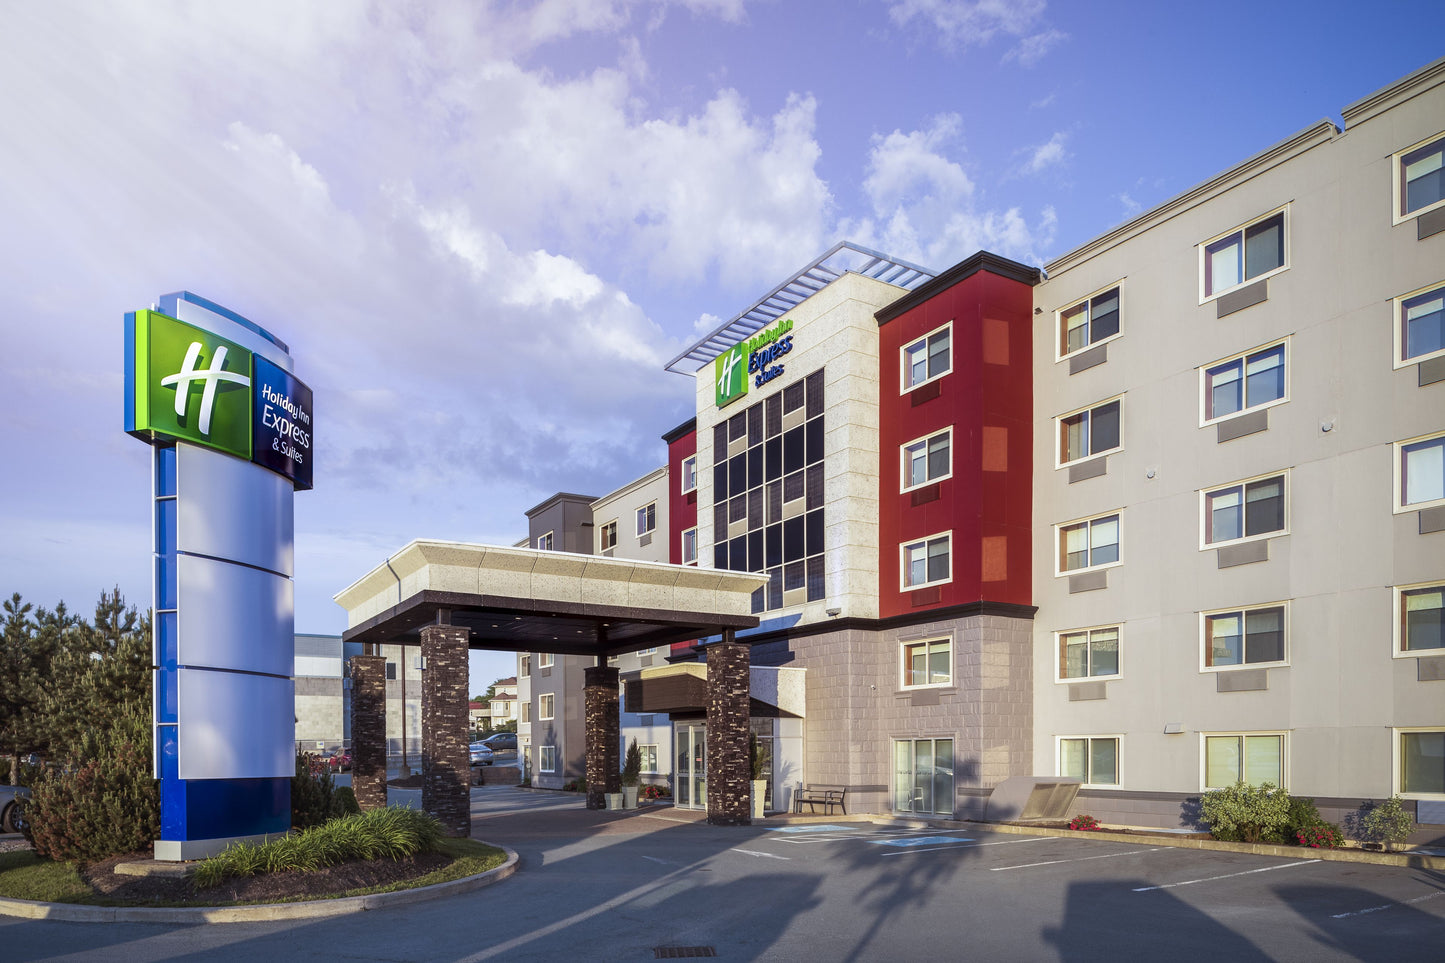 Hotel Review: Holiday Inn Express & Suites Halifax (Reviews, Pricing & Amenities)